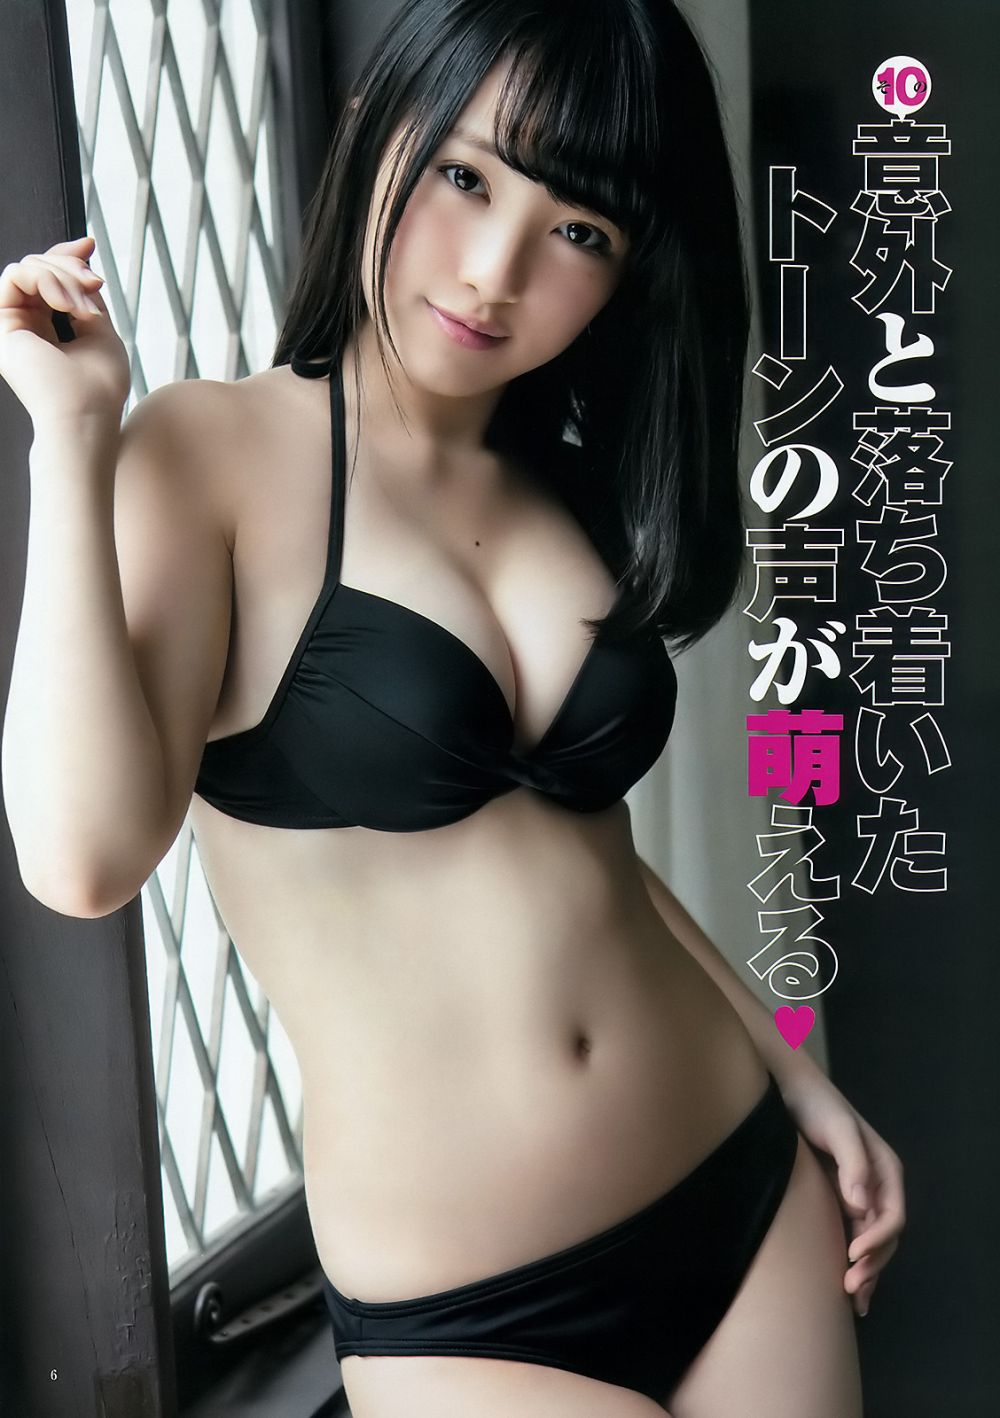 Mion Mukaichi Sexy and Hottest Photos , Latest Pics